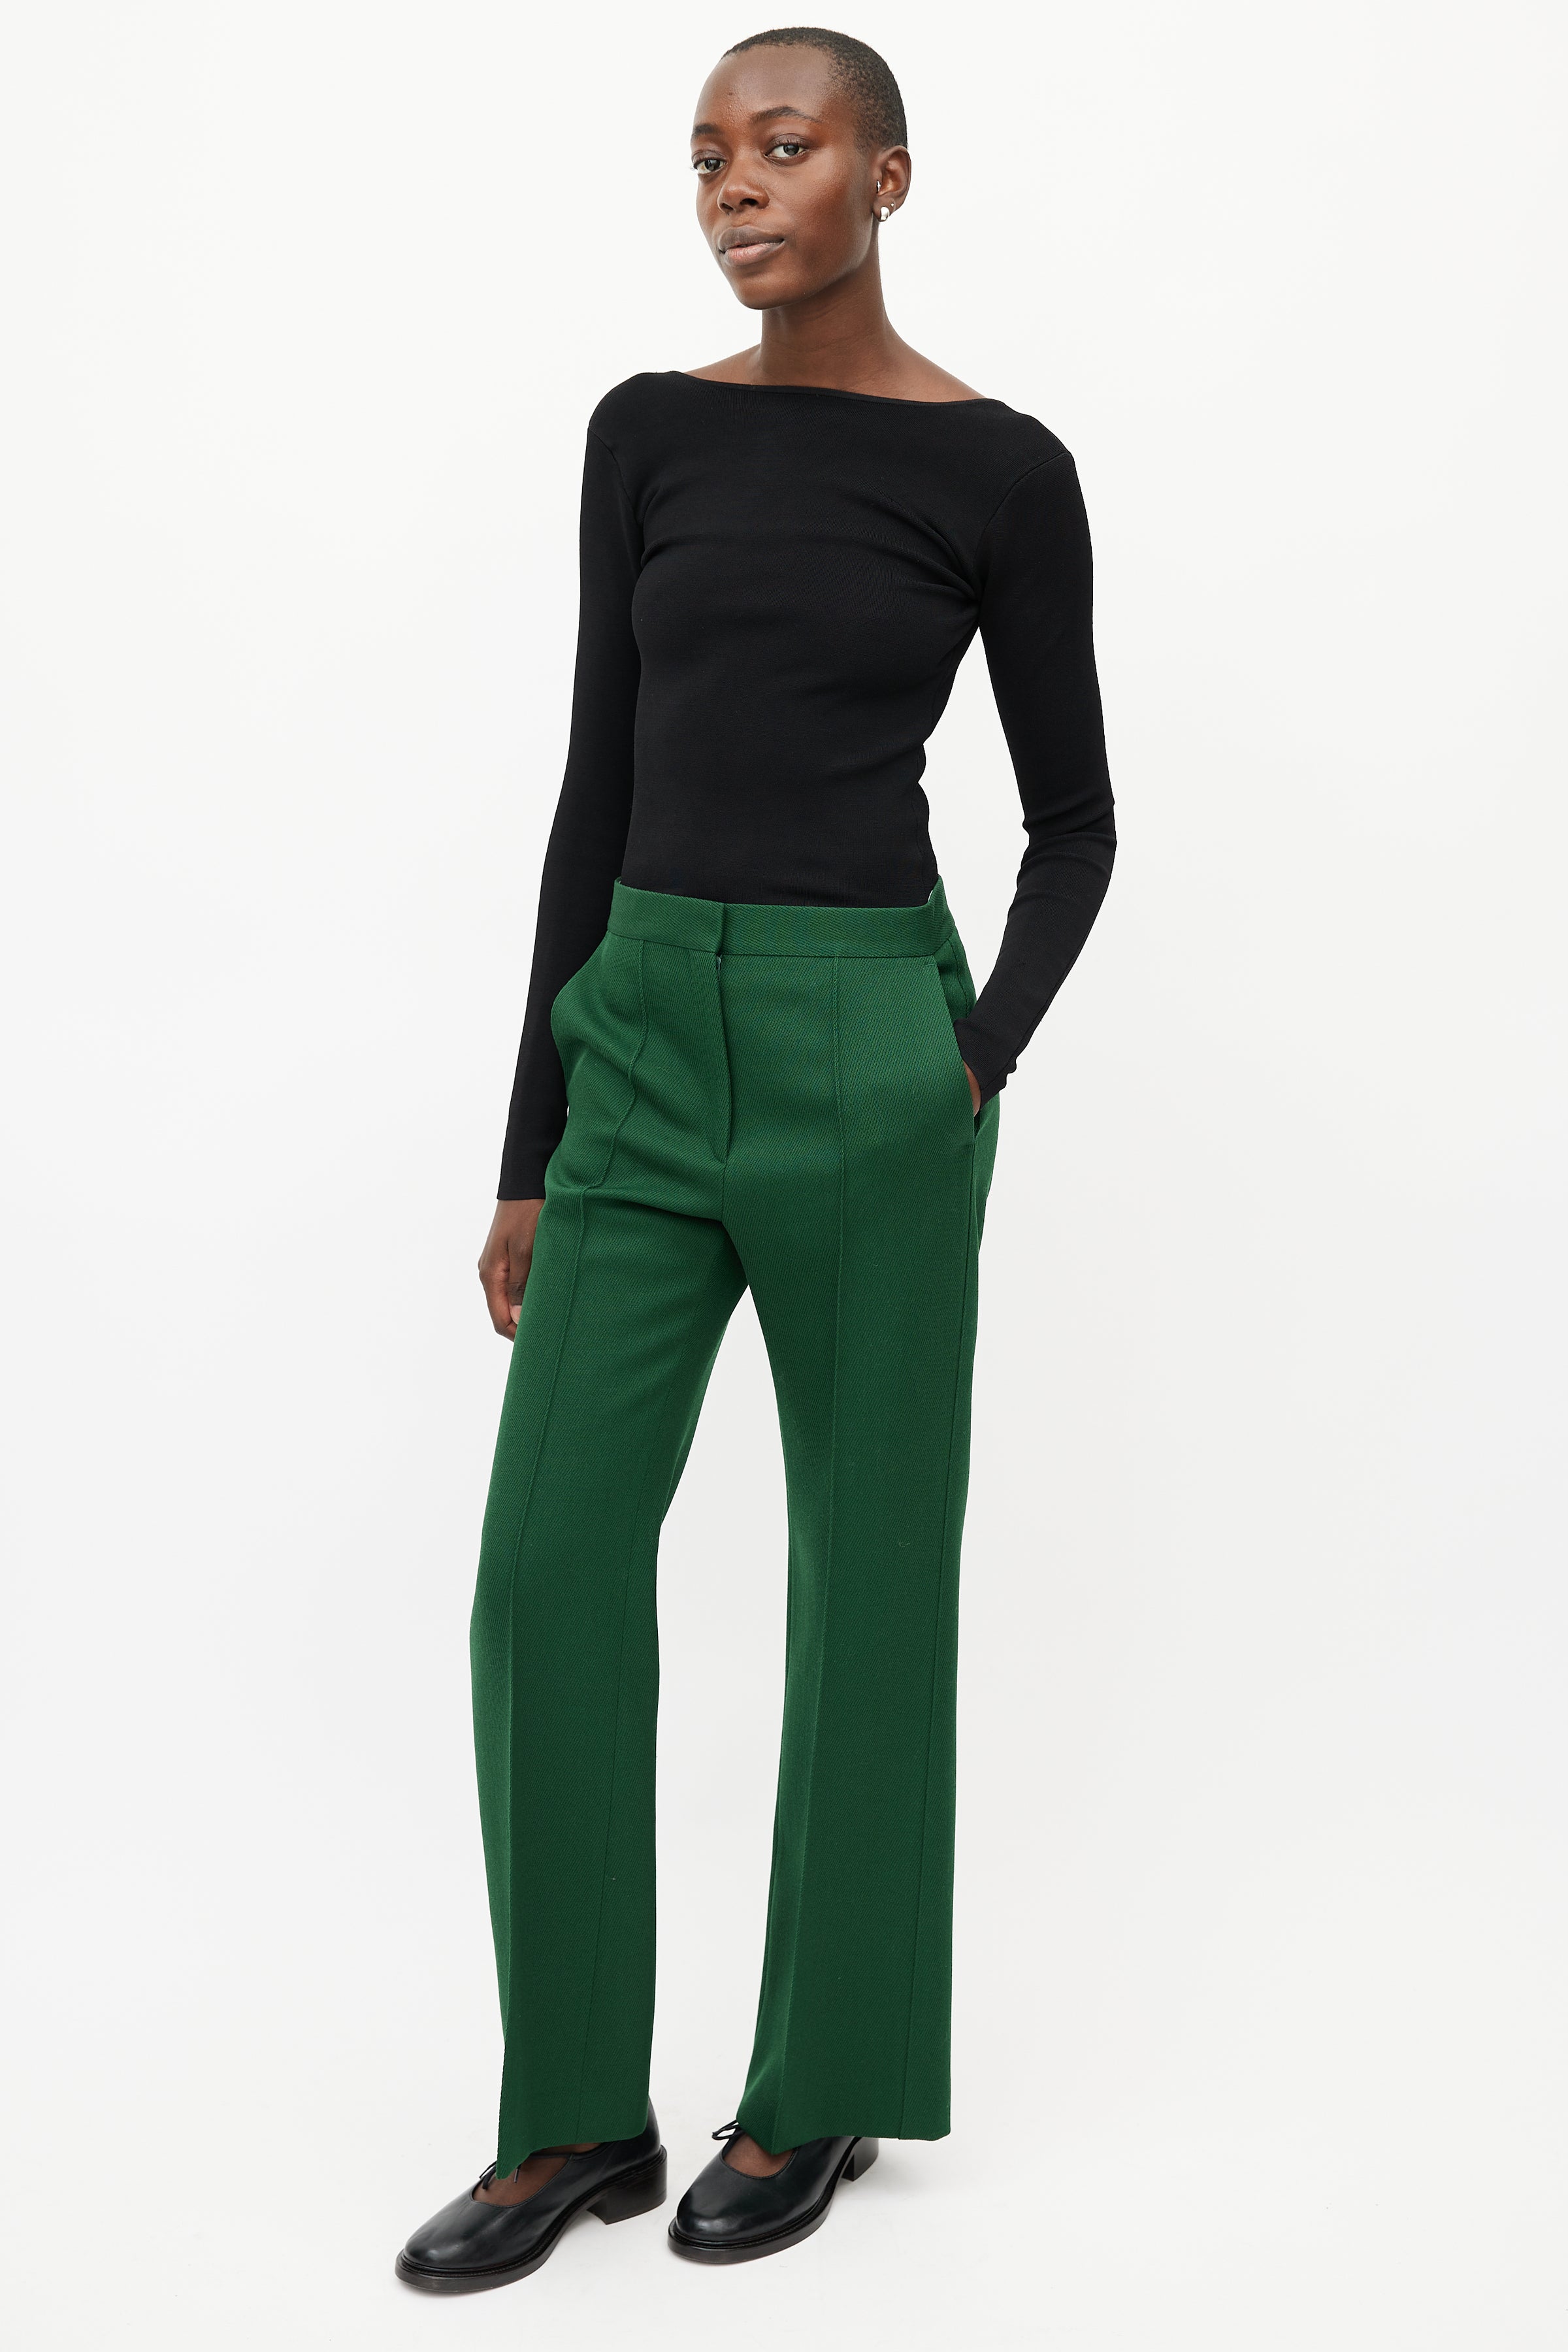 Buy Dream Beauty Fashion Women's Bell Bottom High Waist Trouser, Elastic  Flared Bootcut Pants, Stretchy Parallel Leg for Casual Office Work wear  (Dhoni 4- Dark Green-S) at Amazon.in